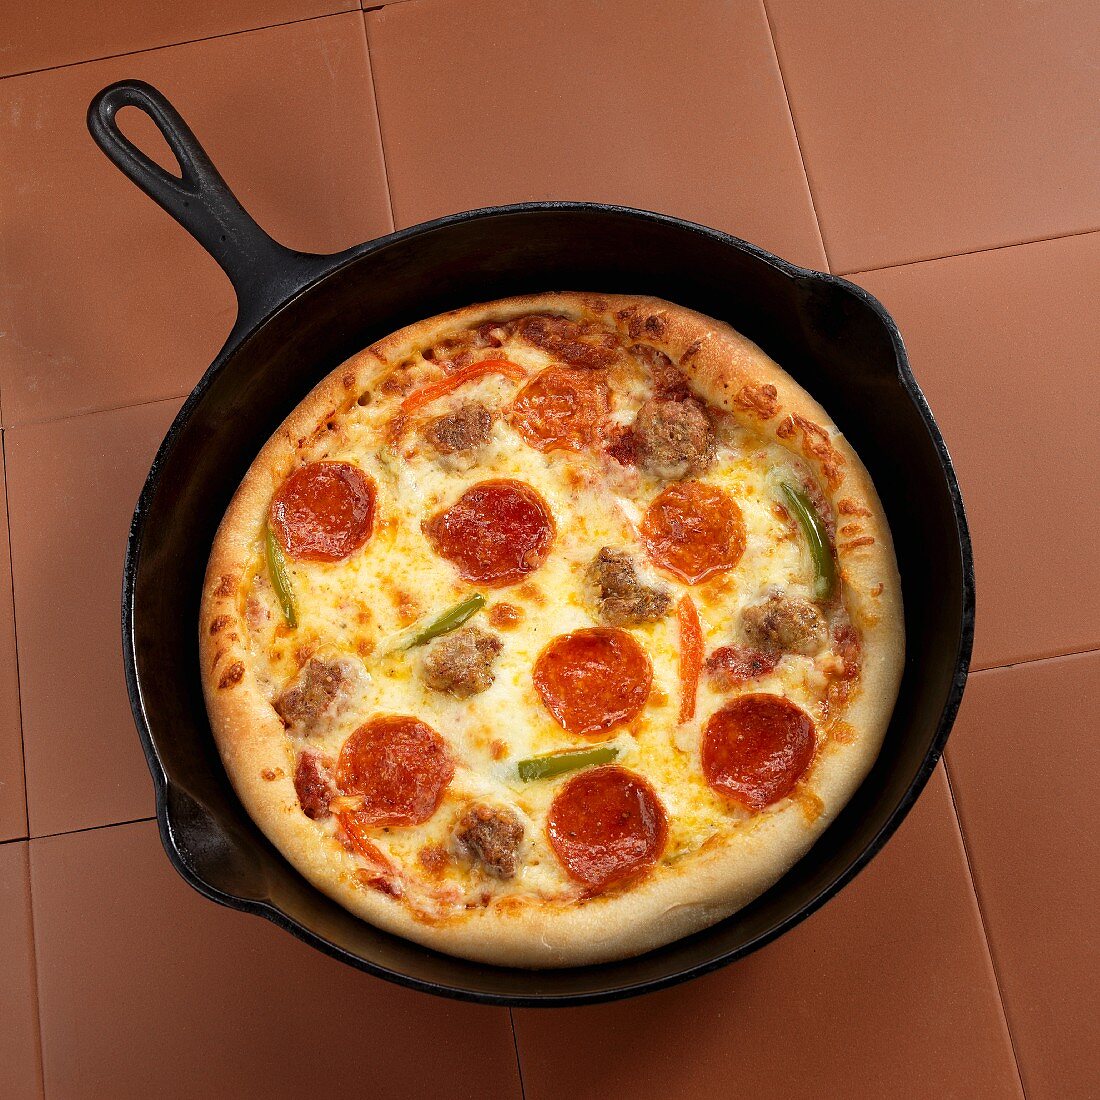 A pan pizza with sausage and peppers